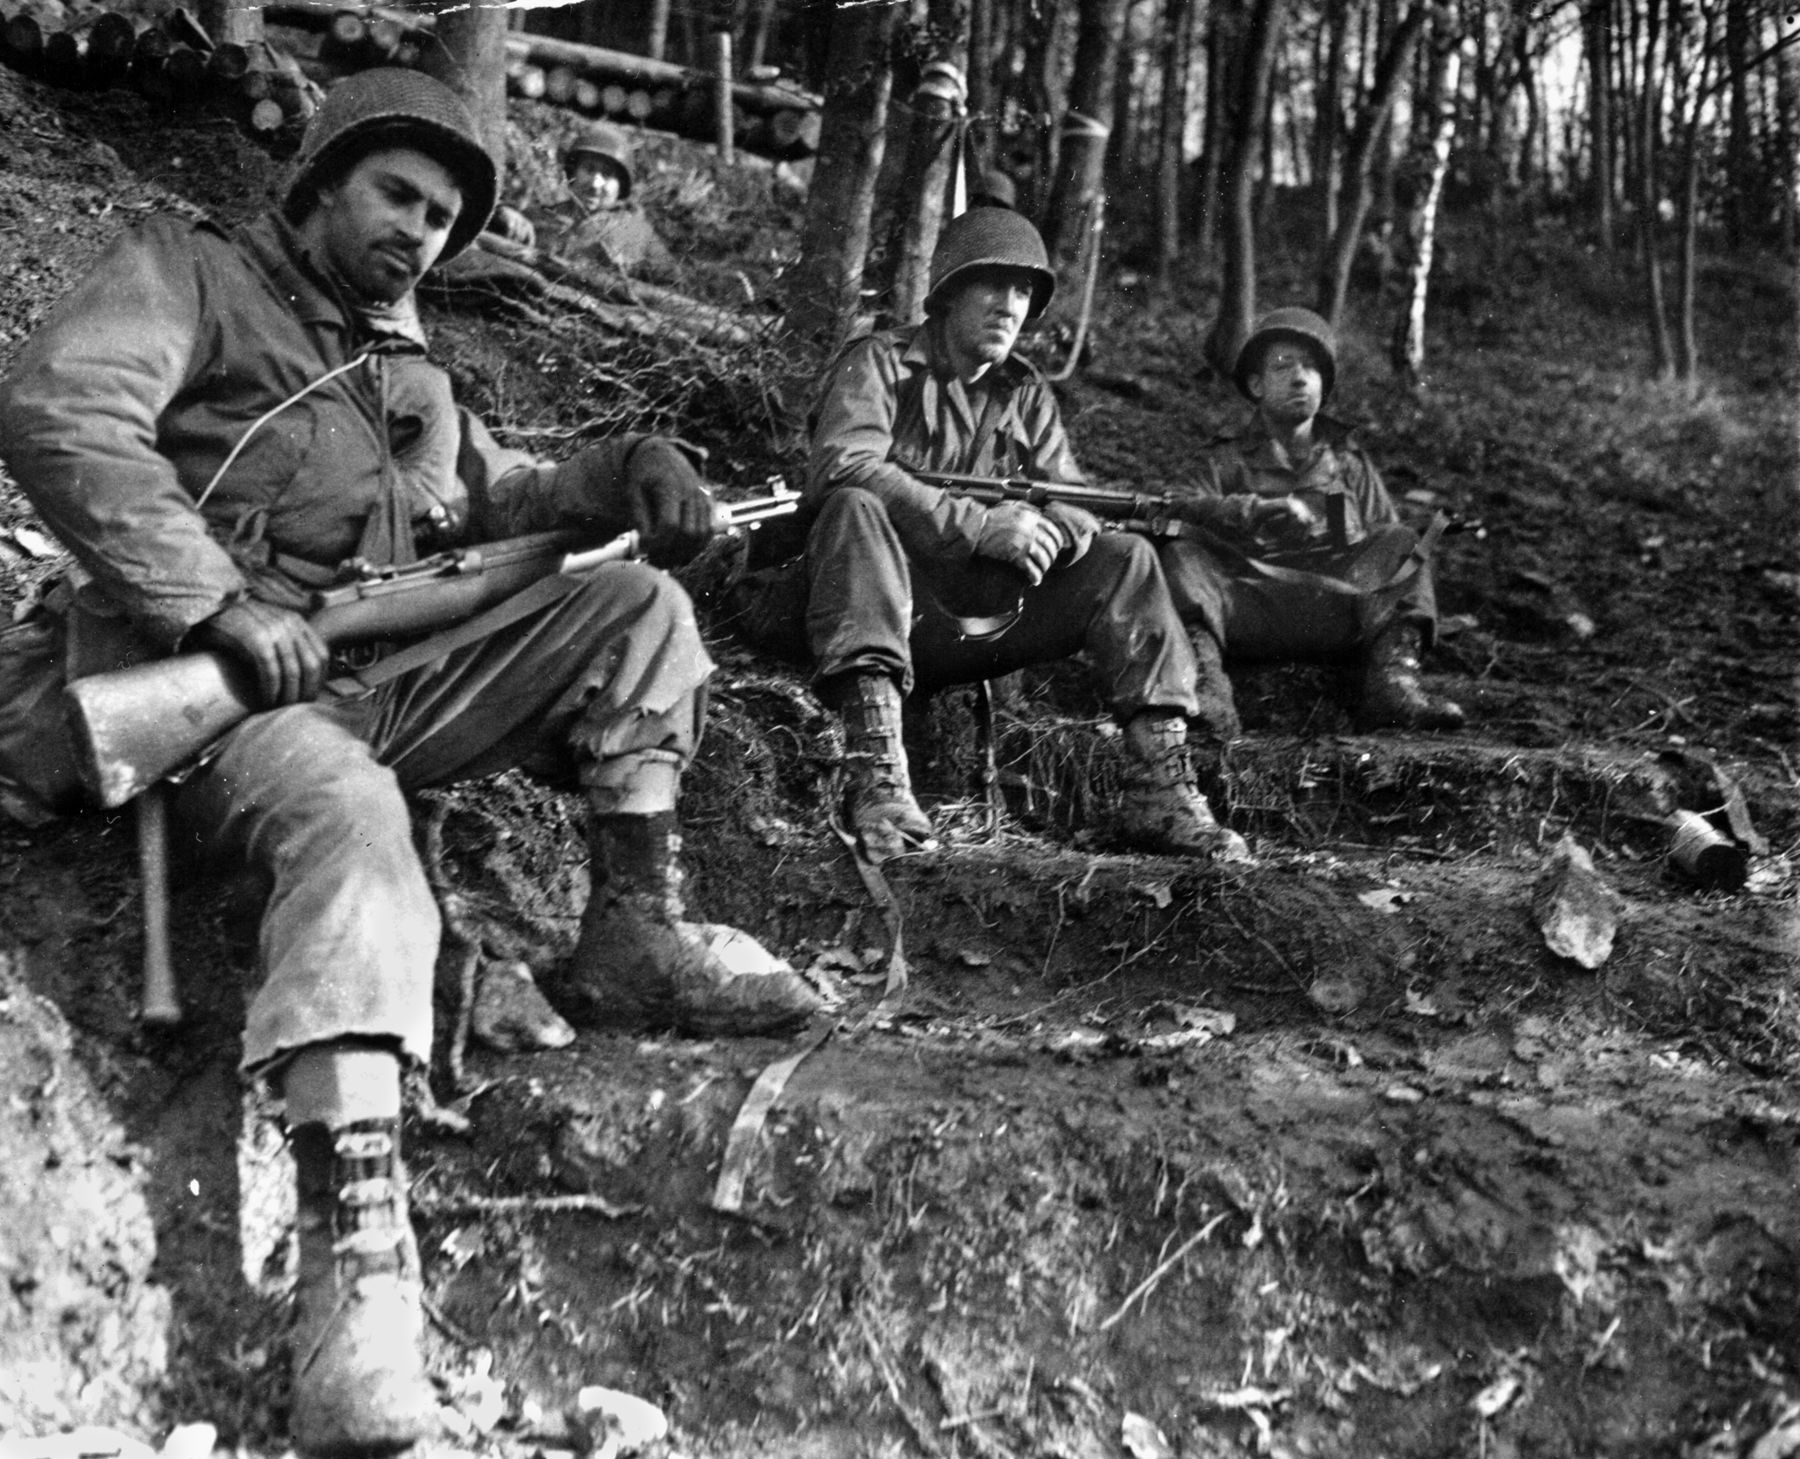 Weary from the rough travel through the Hürtgen Forest, men of the 4th Infantry Division take a brief but much-needed rest. 